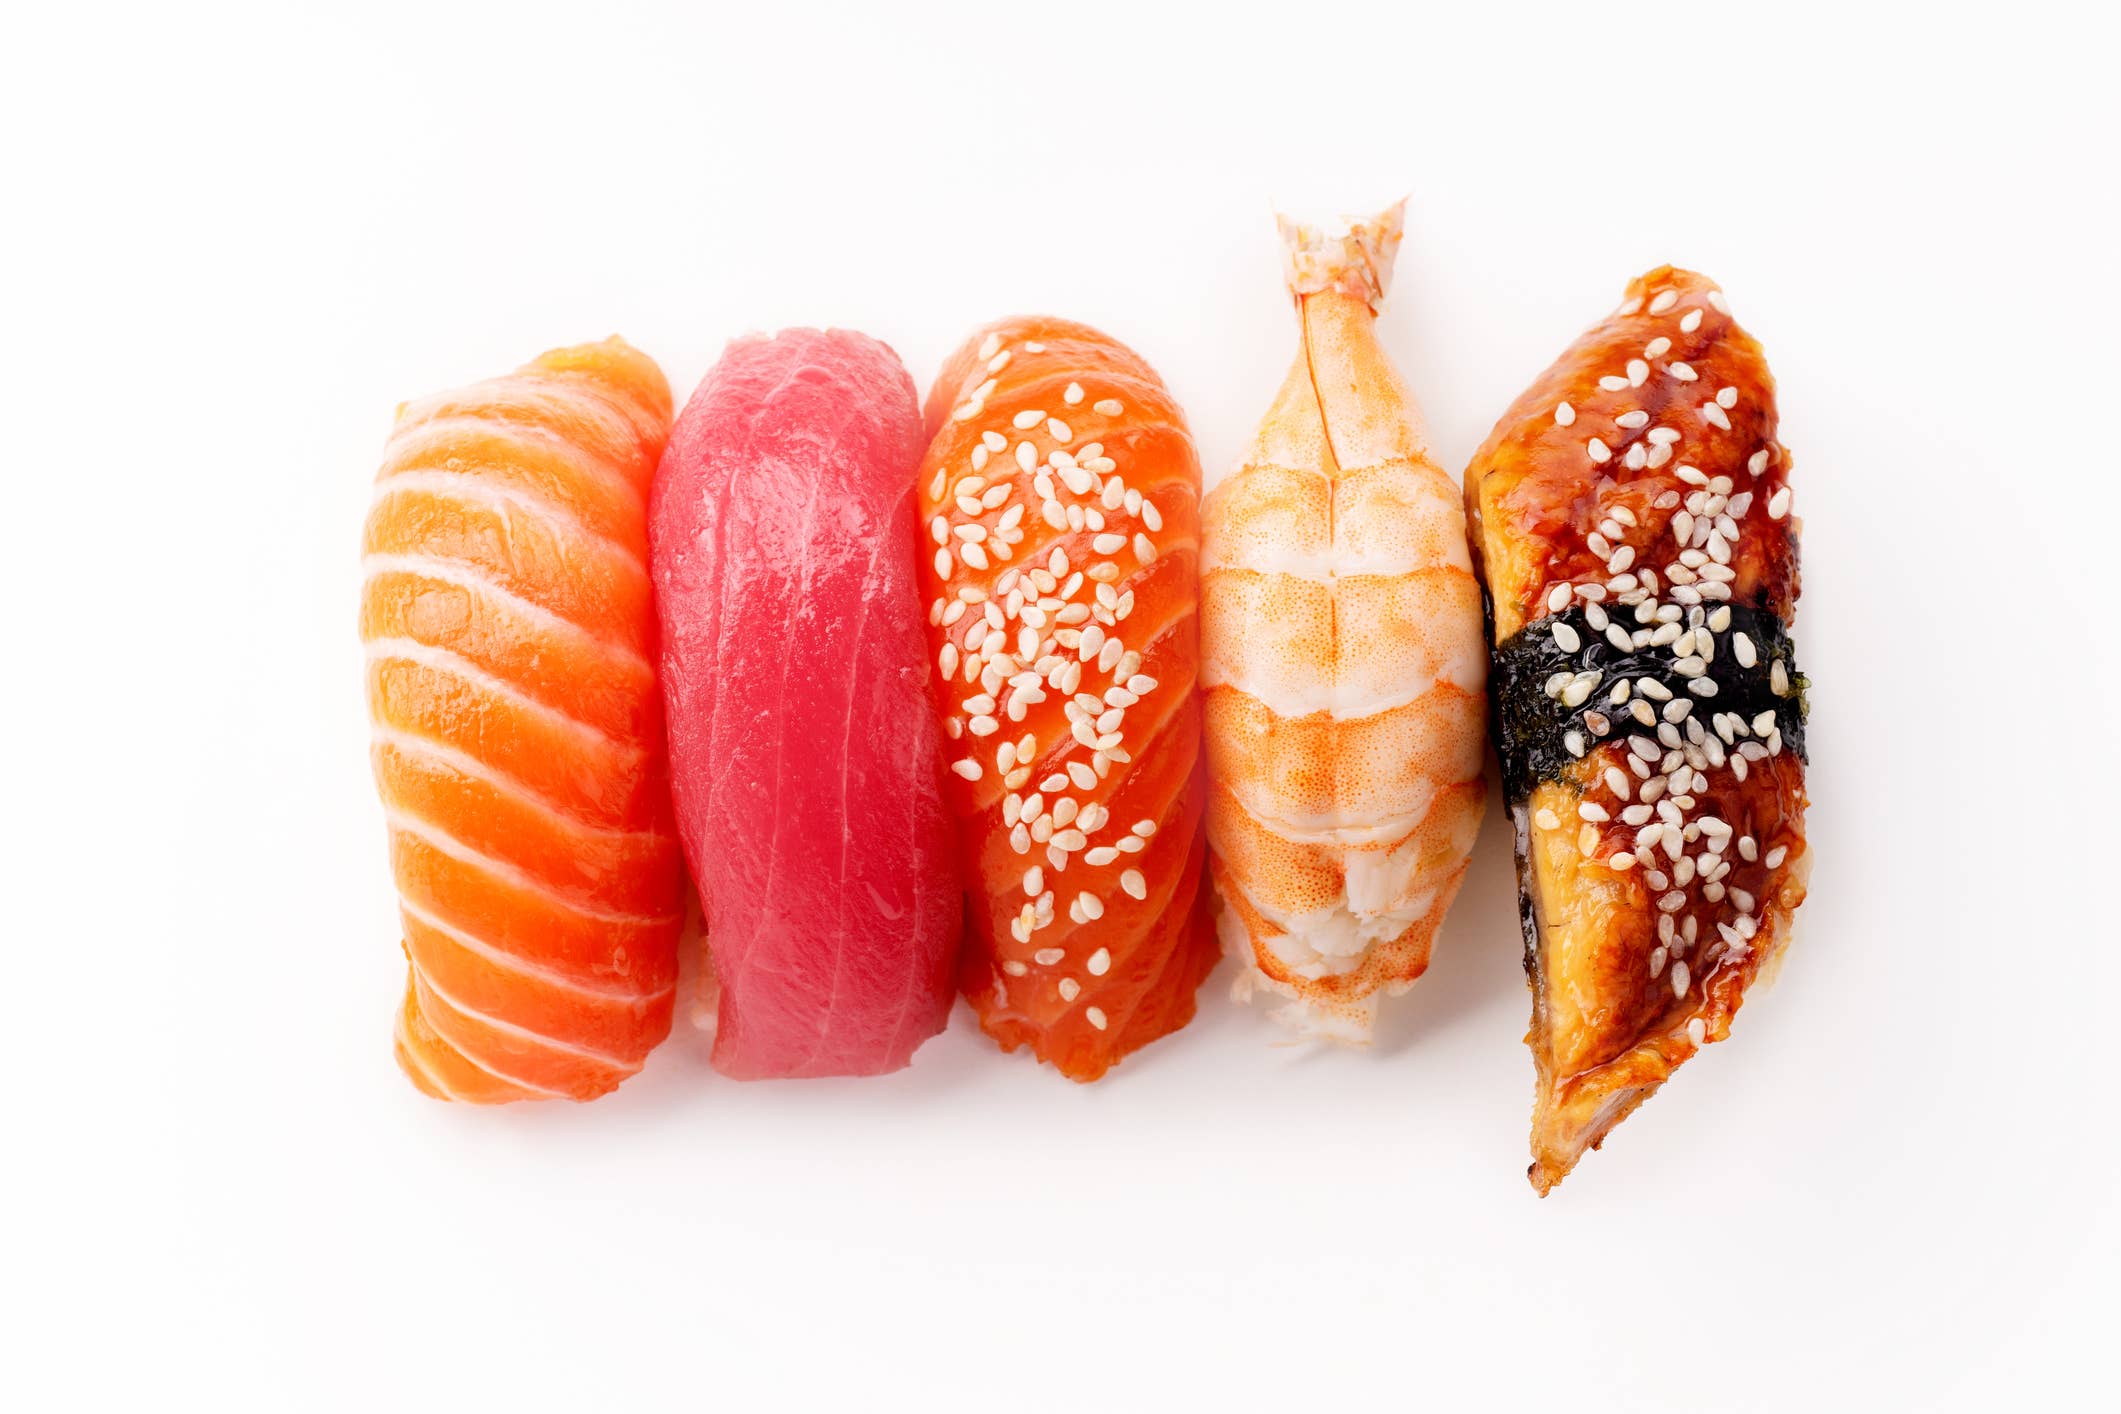 What is the purpose of dipping the fish side of nigiri sushi into soy sauce?